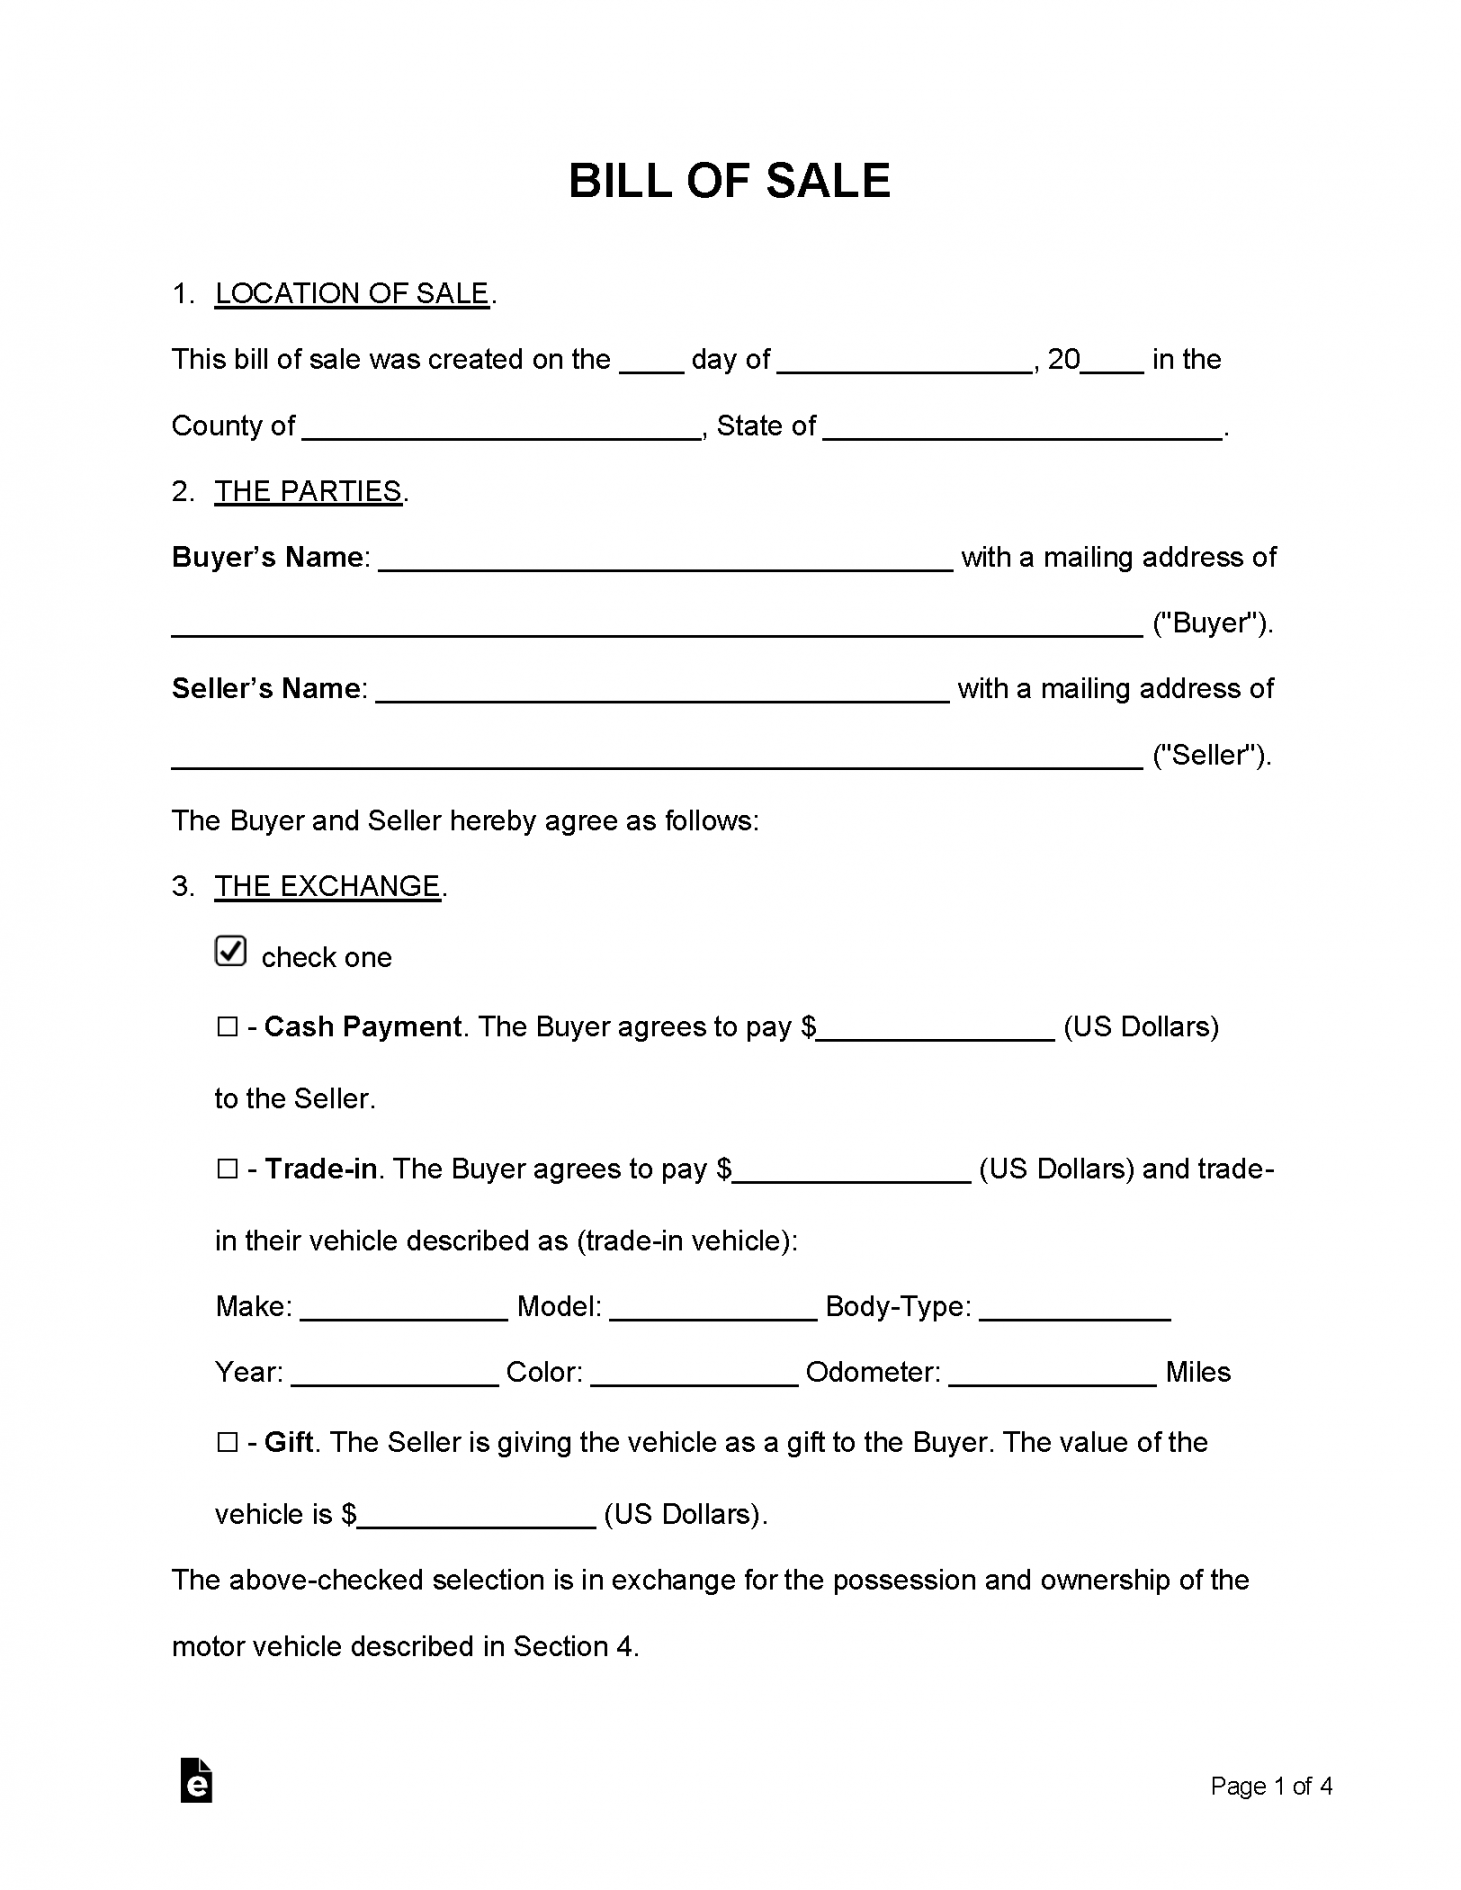 Free Bill of Sale Forms () - PDF  Word – eForms - FREE Printables - Free Printable Bill Of Sale